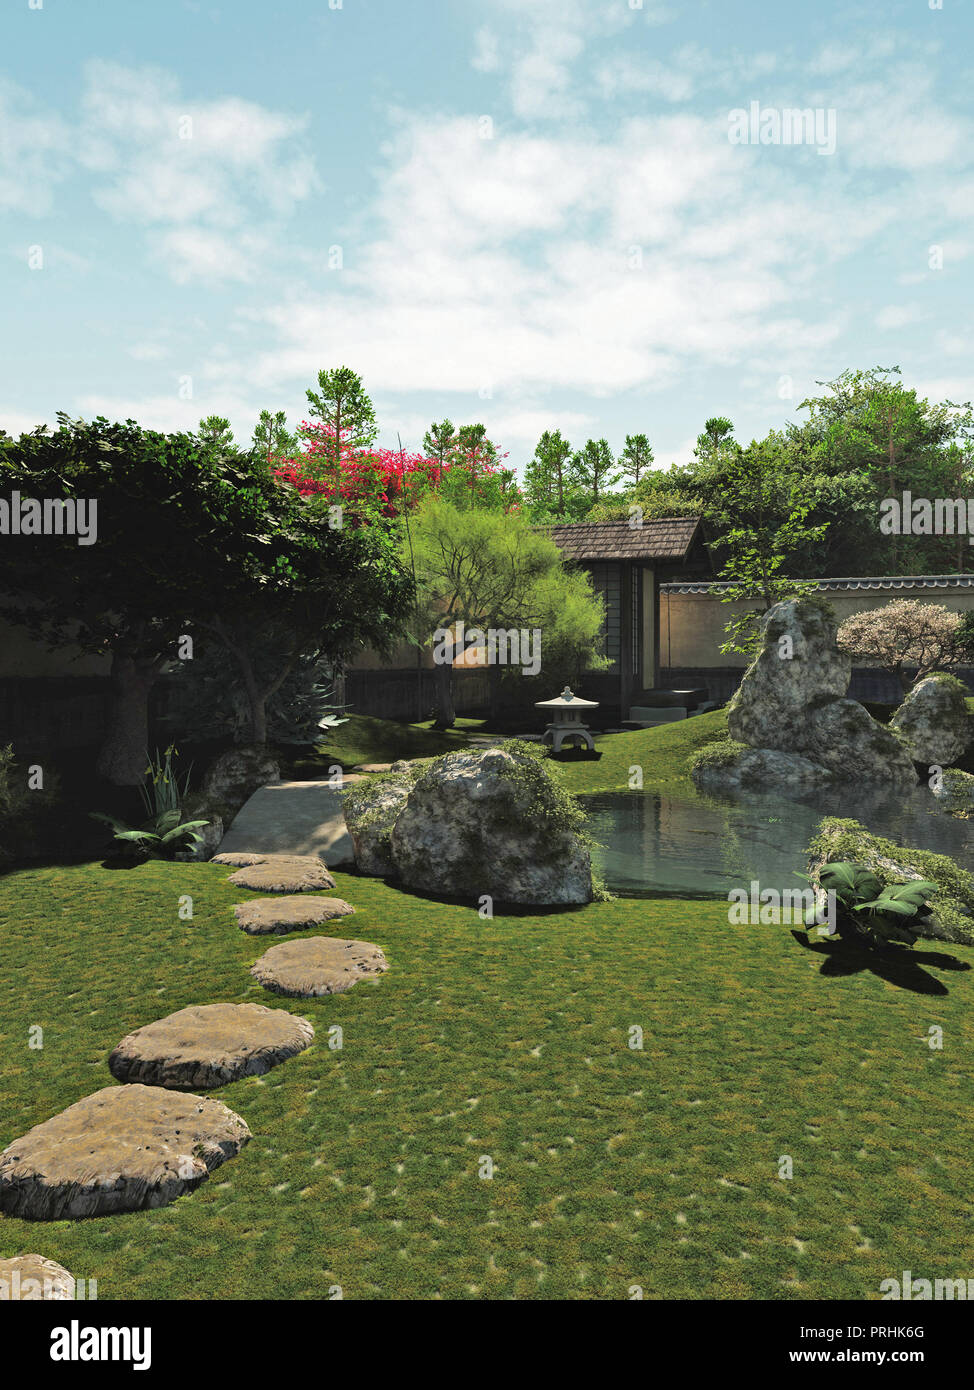 Japanese Garden with Tea House and Pond Stock Photo